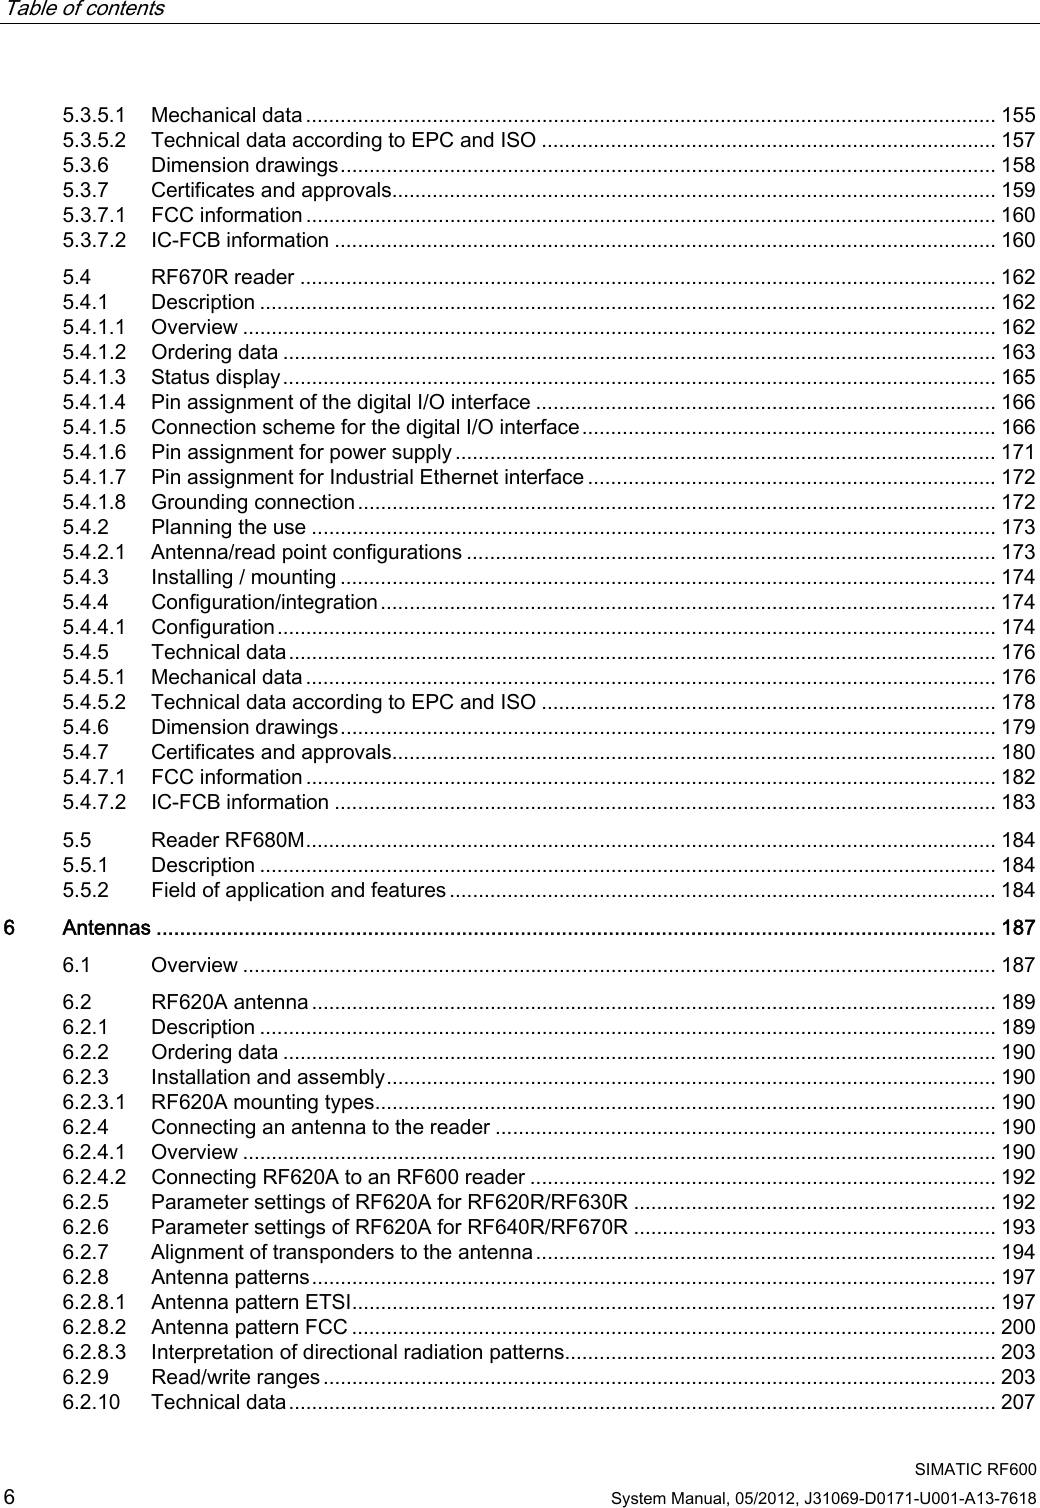 Table of contents      SIMATIC RF600 6 System Manual, 05/2012, J31069-D0171-U001-A13-7618 5.3.5.1  Mechanical data ........................................................................................................................ 155 5.3.5.2  Technical data according to EPC and ISO ............................................................................... 157 5.3.6  Dimension drawings.................................................................................................................. 158 5.3.7  Certificates and approvals......................................................................................................... 159 5.3.7.1  FCC information ........................................................................................................................ 160 5.3.7.2  IC-FCB information ................................................................................................................... 160 5.4  RF670R reader ......................................................................................................................... 162 5.4.1  Description ................................................................................................................................ 162 5.4.1.1  Overview ................................................................................................................................... 162 5.4.1.2  Ordering data ............................................................................................................................ 163 5.4.1.3  Status display............................................................................................................................ 165 5.4.1.4  Pin assignment of the digital I/O interface ................................................................................ 166 5.4.1.5  Connection scheme for the digital I/O interface........................................................................166 5.4.1.6  Pin assignment for power supply.............................................................................................. 171 5.4.1.7  Pin assignment for Industrial Ethernet interface .......................................................................172 5.4.1.8  Grounding connection ............................................................................................................... 172 5.4.2  Planning the use ....................................................................................................................... 173 5.4.2.1  Antenna/read point configurations ............................................................................................ 173 5.4.3  Installing / mounting .................................................................................................................. 174 5.4.4  Configuration/integration........................................................................................................... 174 5.4.4.1  Configuration............................................................................................................................. 174 5.4.5  Technical data........................................................................................................................... 176 5.4.5.1  Mechanical data ........................................................................................................................ 176 5.4.5.2  Technical data according to EPC and ISO ............................................................................... 178 5.4.6  Dimension drawings.................................................................................................................. 179 5.4.7  Certificates and approvals......................................................................................................... 180 5.4.7.1  FCC information ........................................................................................................................ 182 5.4.7.2  IC-FCB information ................................................................................................................... 183 5.5  Reader RF680M........................................................................................................................ 184 5.5.1  Description ................................................................................................................................ 184 5.5.2  Field of application and features ............................................................................................... 184 6  Antennas ............................................................................................................................................... 187 6.1  Overview ................................................................................................................................... 187 6.2  RF620A antenna....................................................................................................................... 189 6.2.1  Description ................................................................................................................................ 189 6.2.2  Ordering data ............................................................................................................................ 190 6.2.3  Installation and assembly.......................................................................................................... 190 6.2.3.1  RF620A mounting types............................................................................................................ 190 6.2.4  Connecting an antenna to the reader ....................................................................................... 190 6.2.4.1  Overview ................................................................................................................................... 190 6.2.4.2  Connecting RF620A to an RF600 reader ................................................................................. 192 6.2.5  Parameter settings of RF620A for RF620R/RF630R ............................................................... 192 6.2.6  Parameter settings of RF620A for RF640R/RF670R ............................................................... 193 6.2.7  Alignment of transponders to the antenna................................................................................ 194 6.2.8  Antenna patterns....................................................................................................................... 197 6.2.8.1  Antenna pattern ETSI................................................................................................................ 197 6.2.8.2  Antenna pattern FCC ................................................................................................................ 200 6.2.8.3  Interpretation of directional radiation patterns........................................................................... 203 6.2.9  Read/write ranges ..................................................................................................................... 203 6.2.10  Technical data........................................................................................................................... 207 